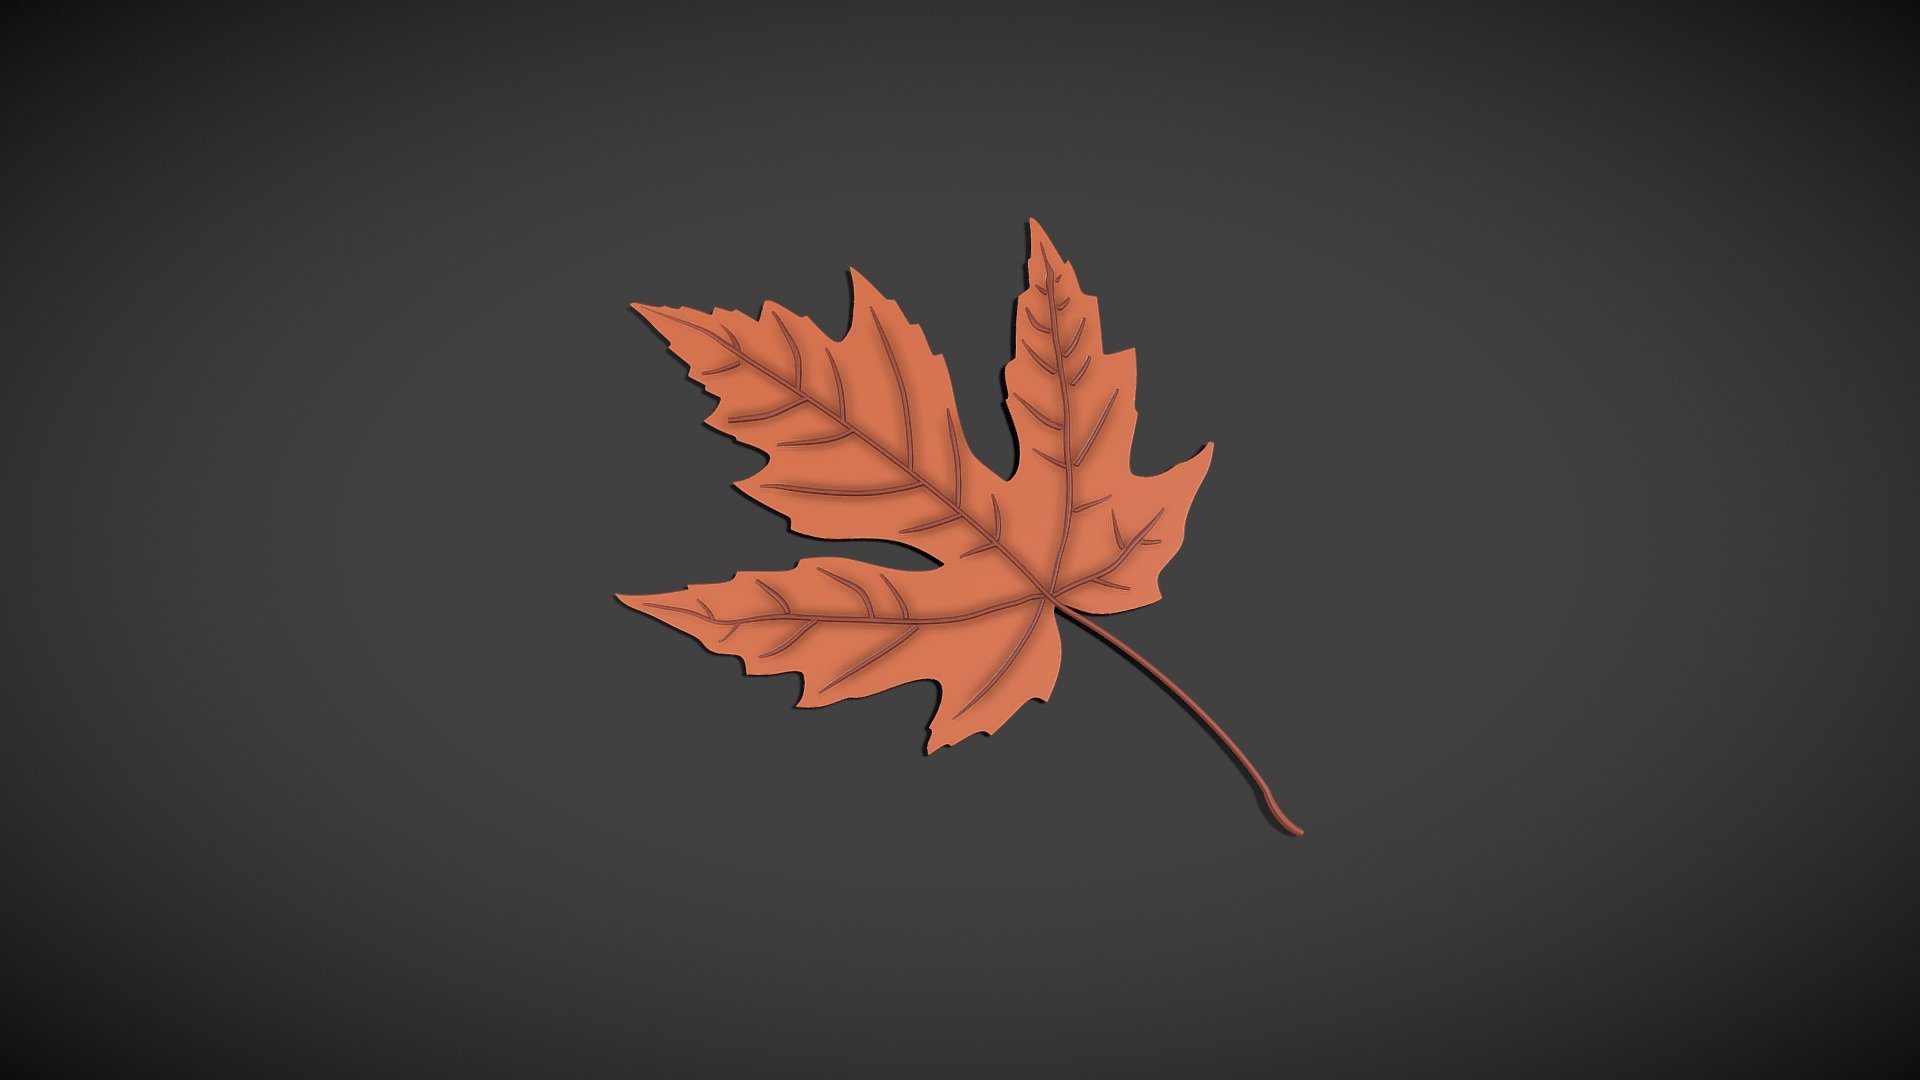 Autumn Leaves modeled in blender 2.9 and rendered in cycles.

3D Printable Model.

Model Size:-
Length : 9.06 cm,
Width : 6.55 cm,
Height : 0.219 cm.

Statistics:-
Verts : 114548,
Edges : 228864,
Faces : 114384,
Tris : 228768 3d model